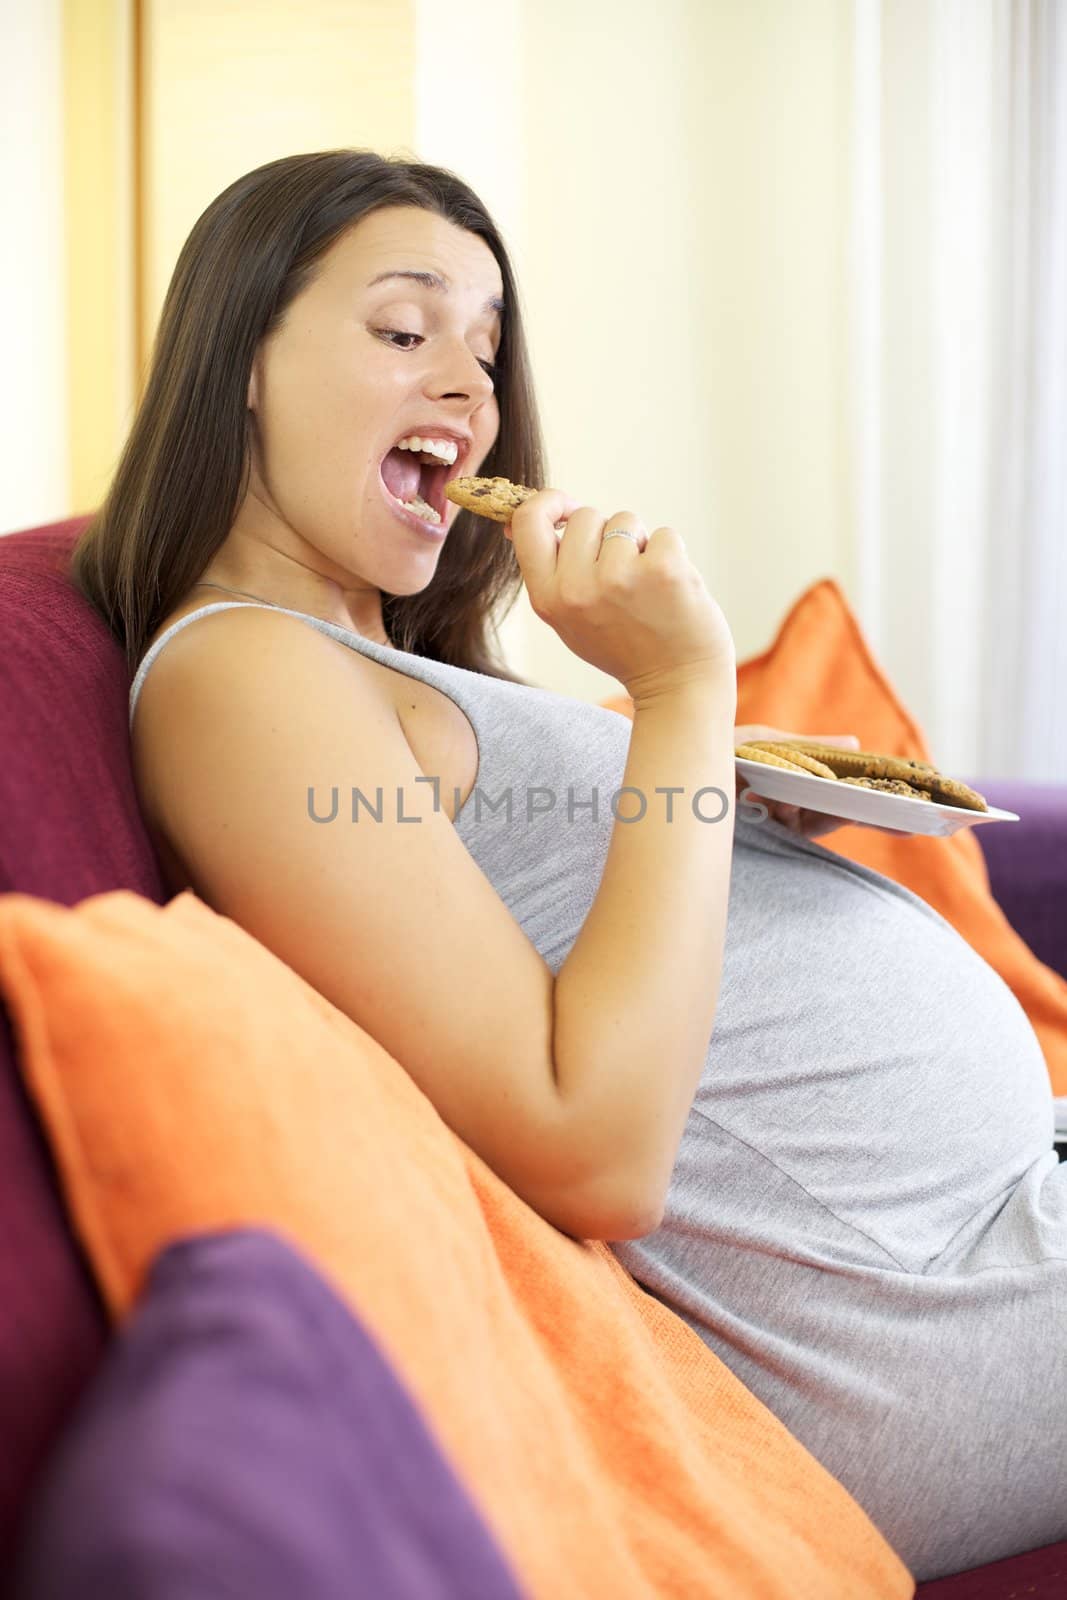 pregnant woman on a diet ready to eat snack